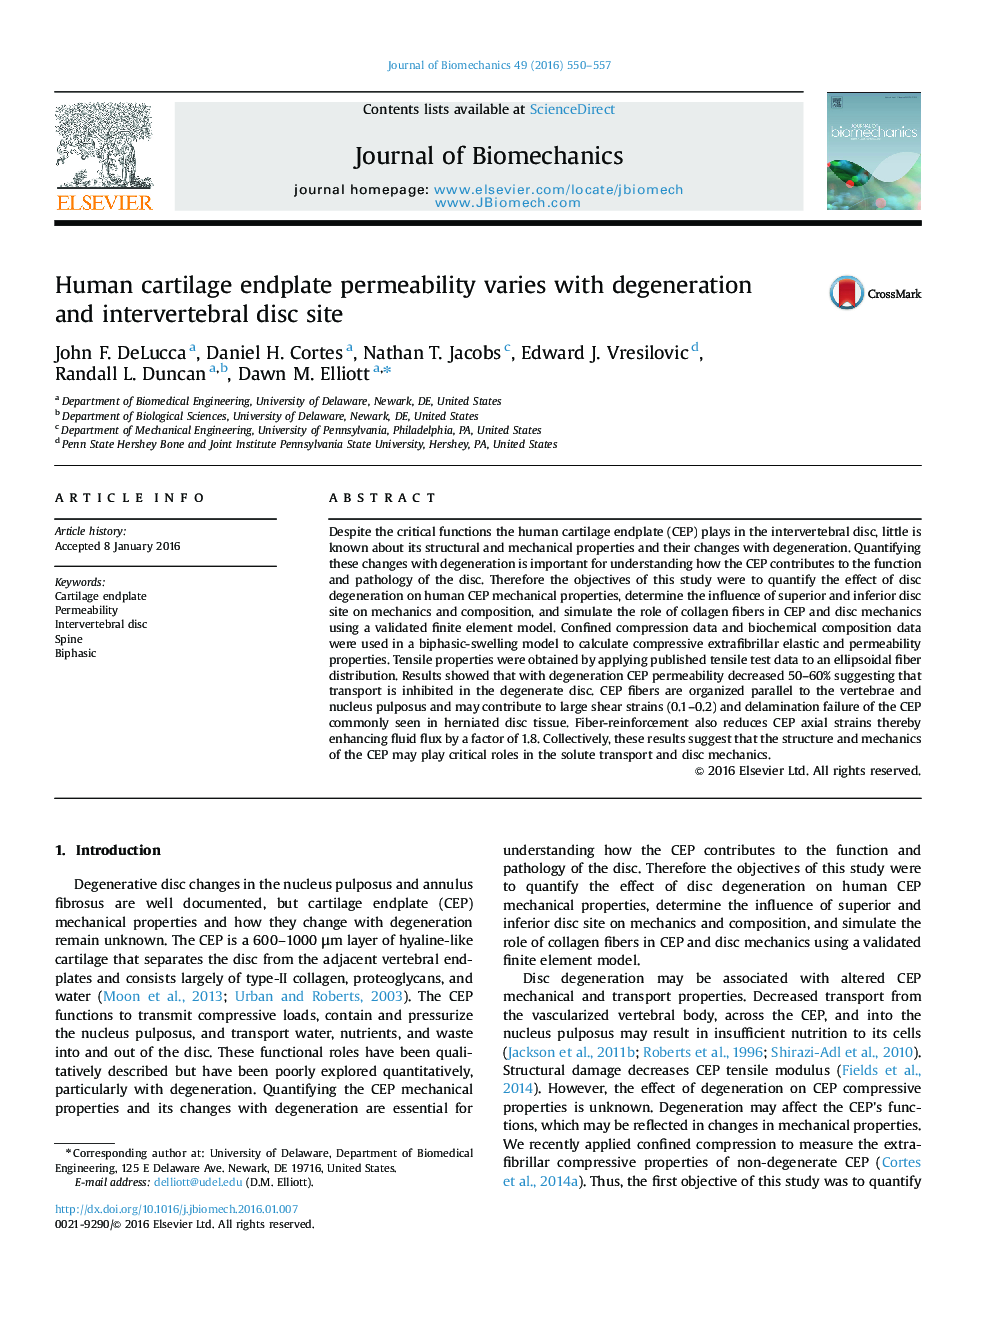 Human cartilage endplate permeability varies with degeneration and intervertebral disc site